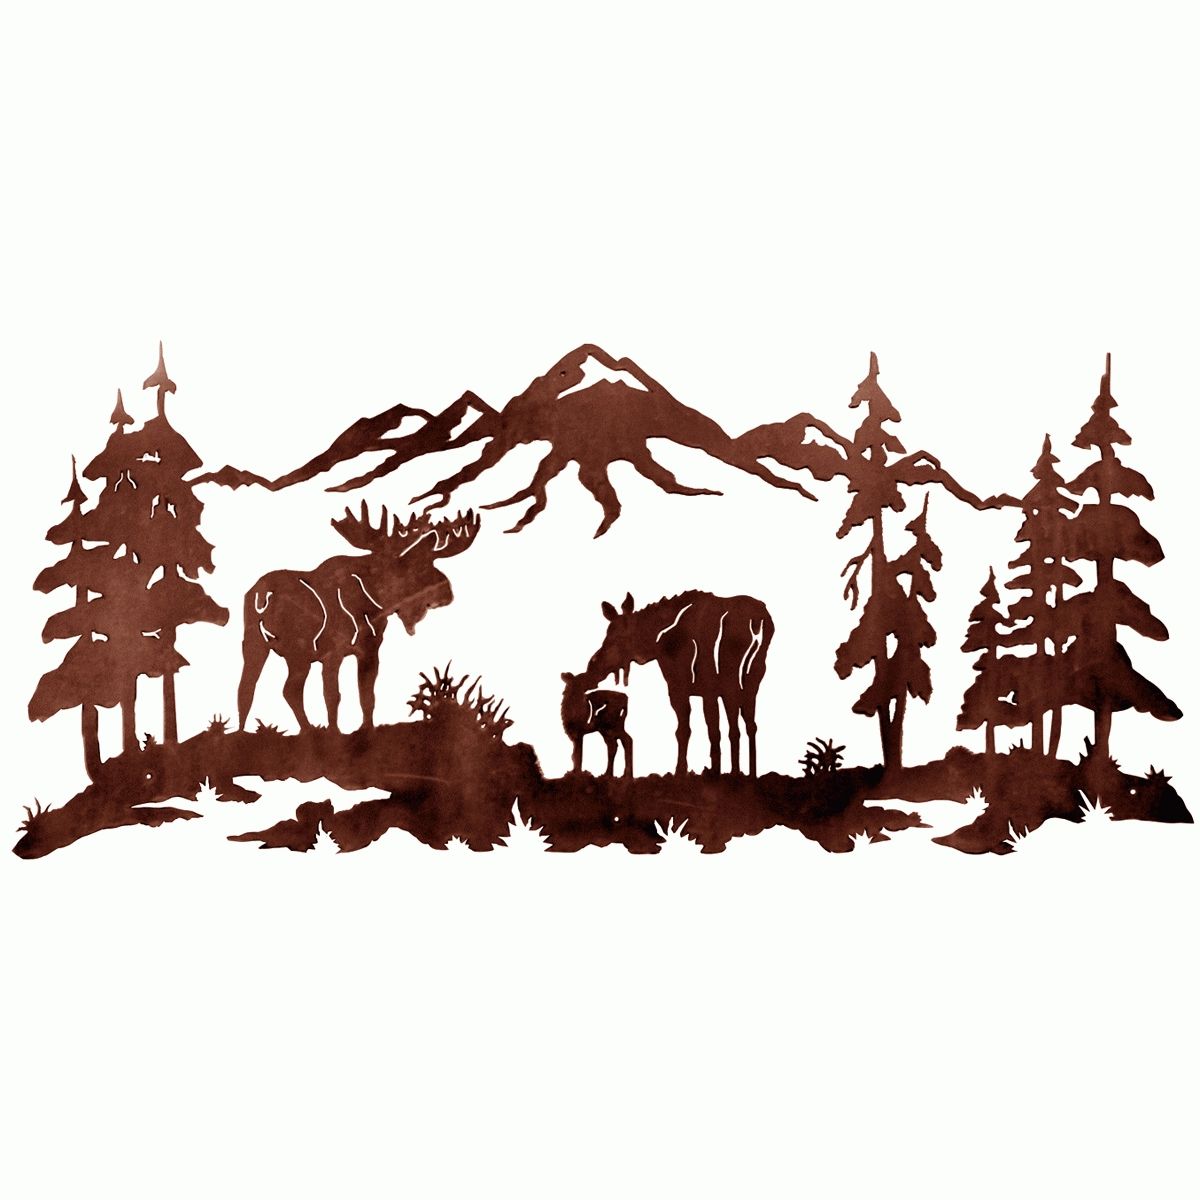 Metal Wall Art At Black Forest Decor Intended For Mountain Scene Metal Wall Art (View 8 of 20)